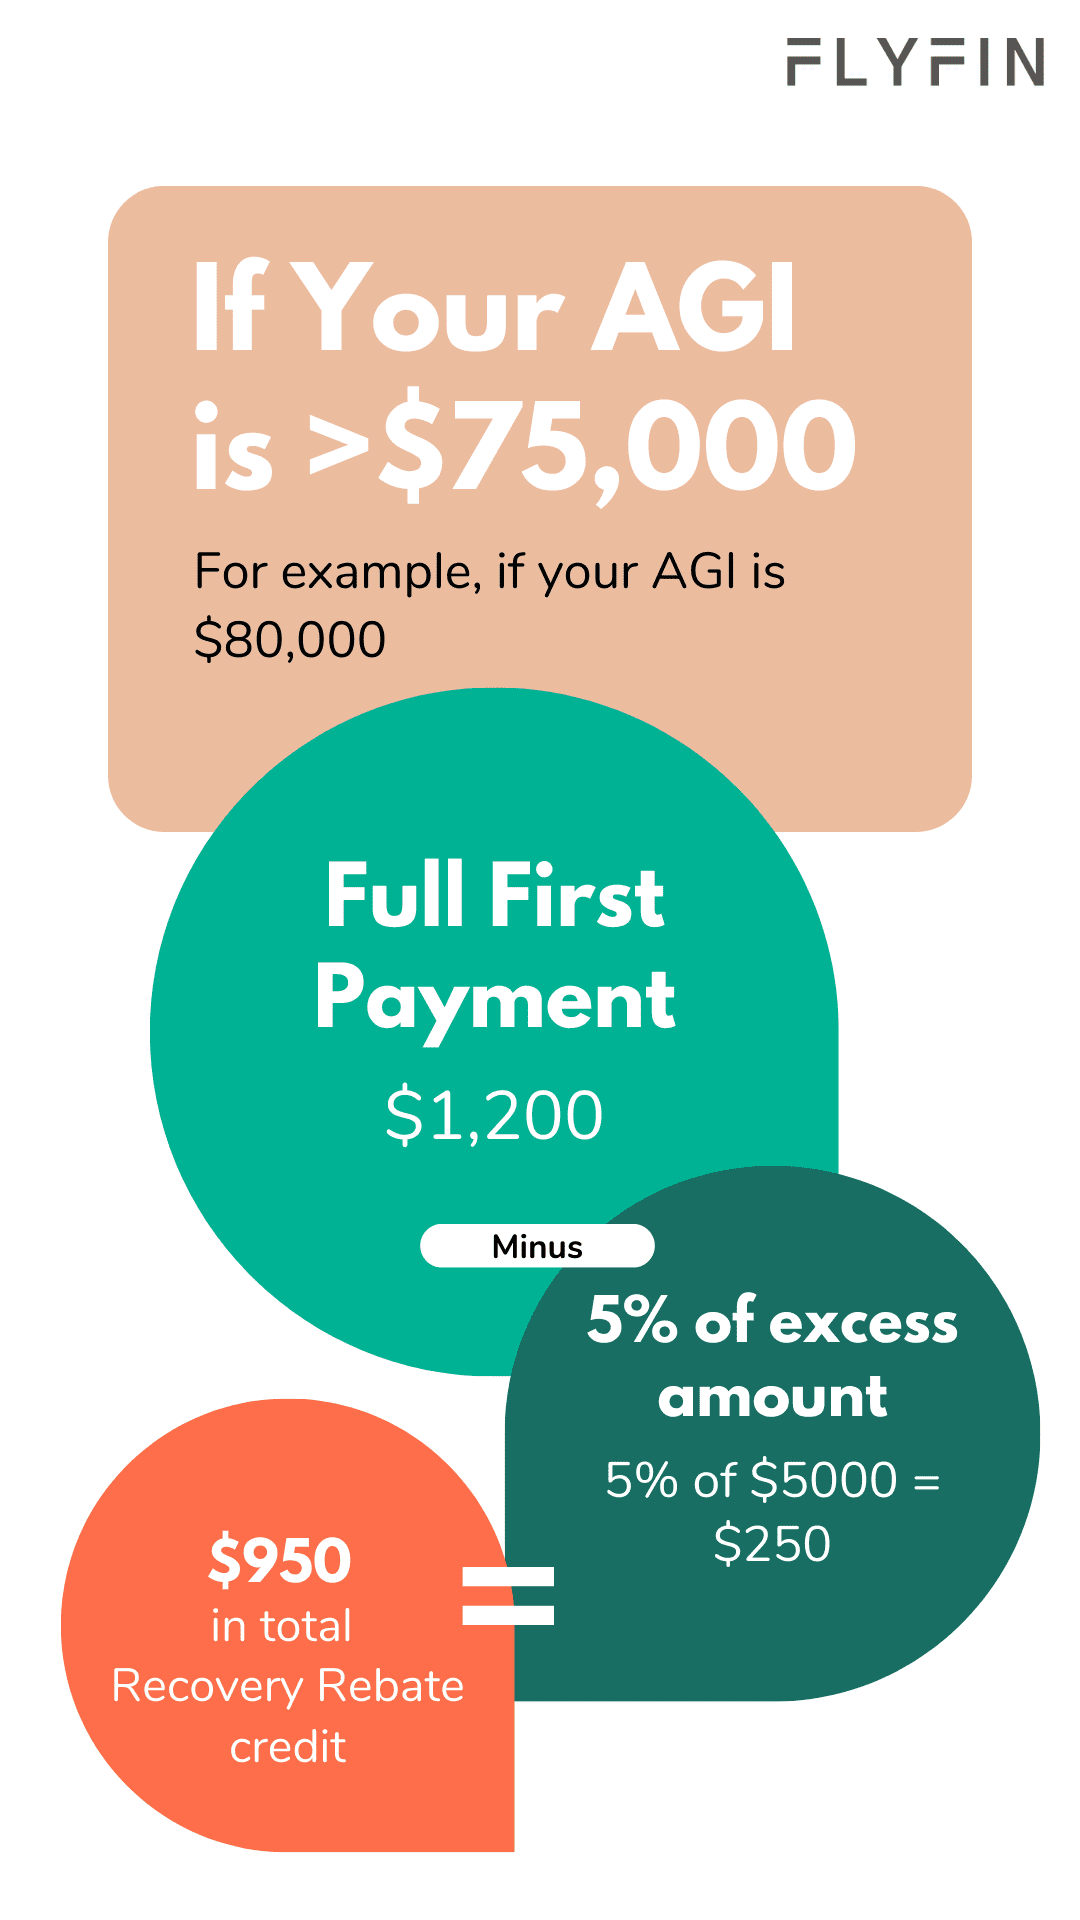 Image shows payment details for Recovery Rebate credit. AGI of $80,000 with excess amount of $5,000 will get $950 in total. No mention of self-employed, 1099, freelancer or taxes.